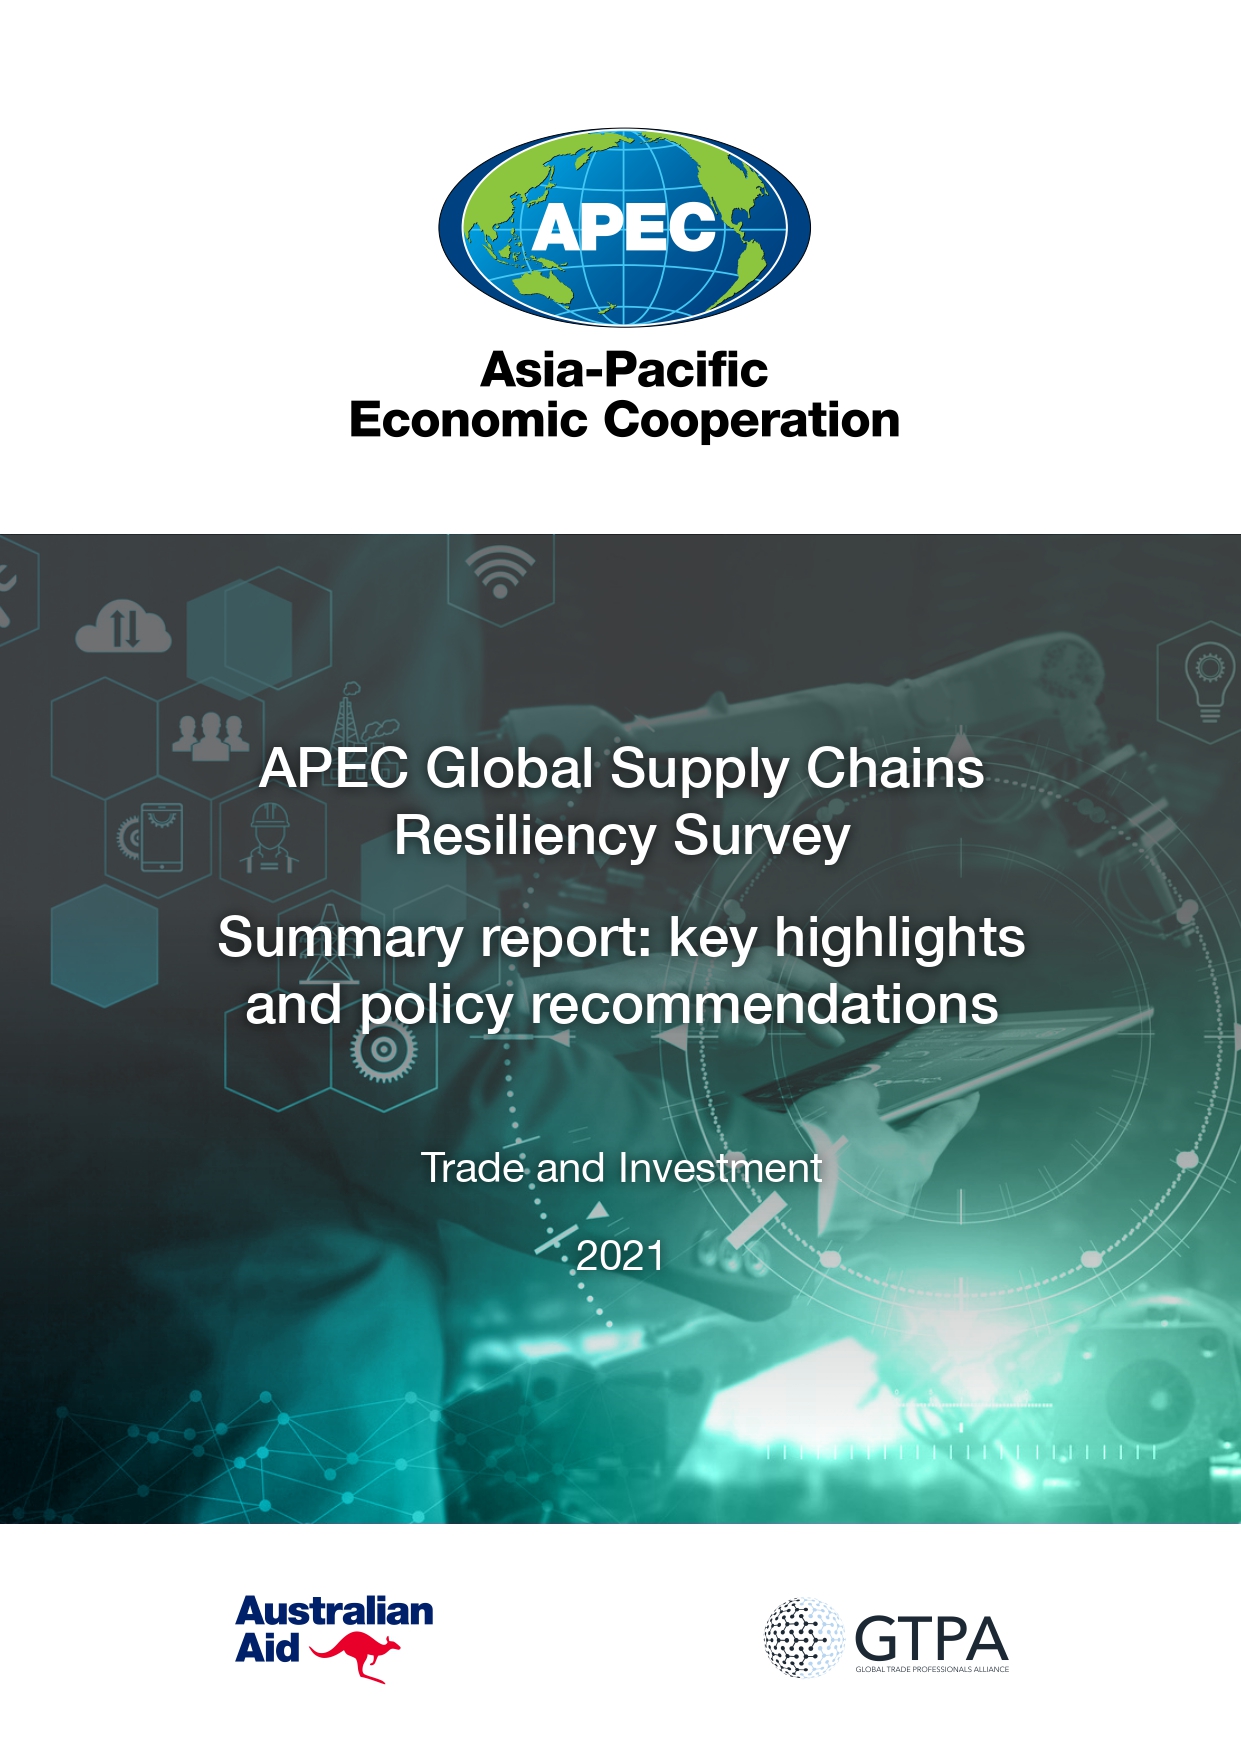 APEC Global Supply Chains Resiliency Survey